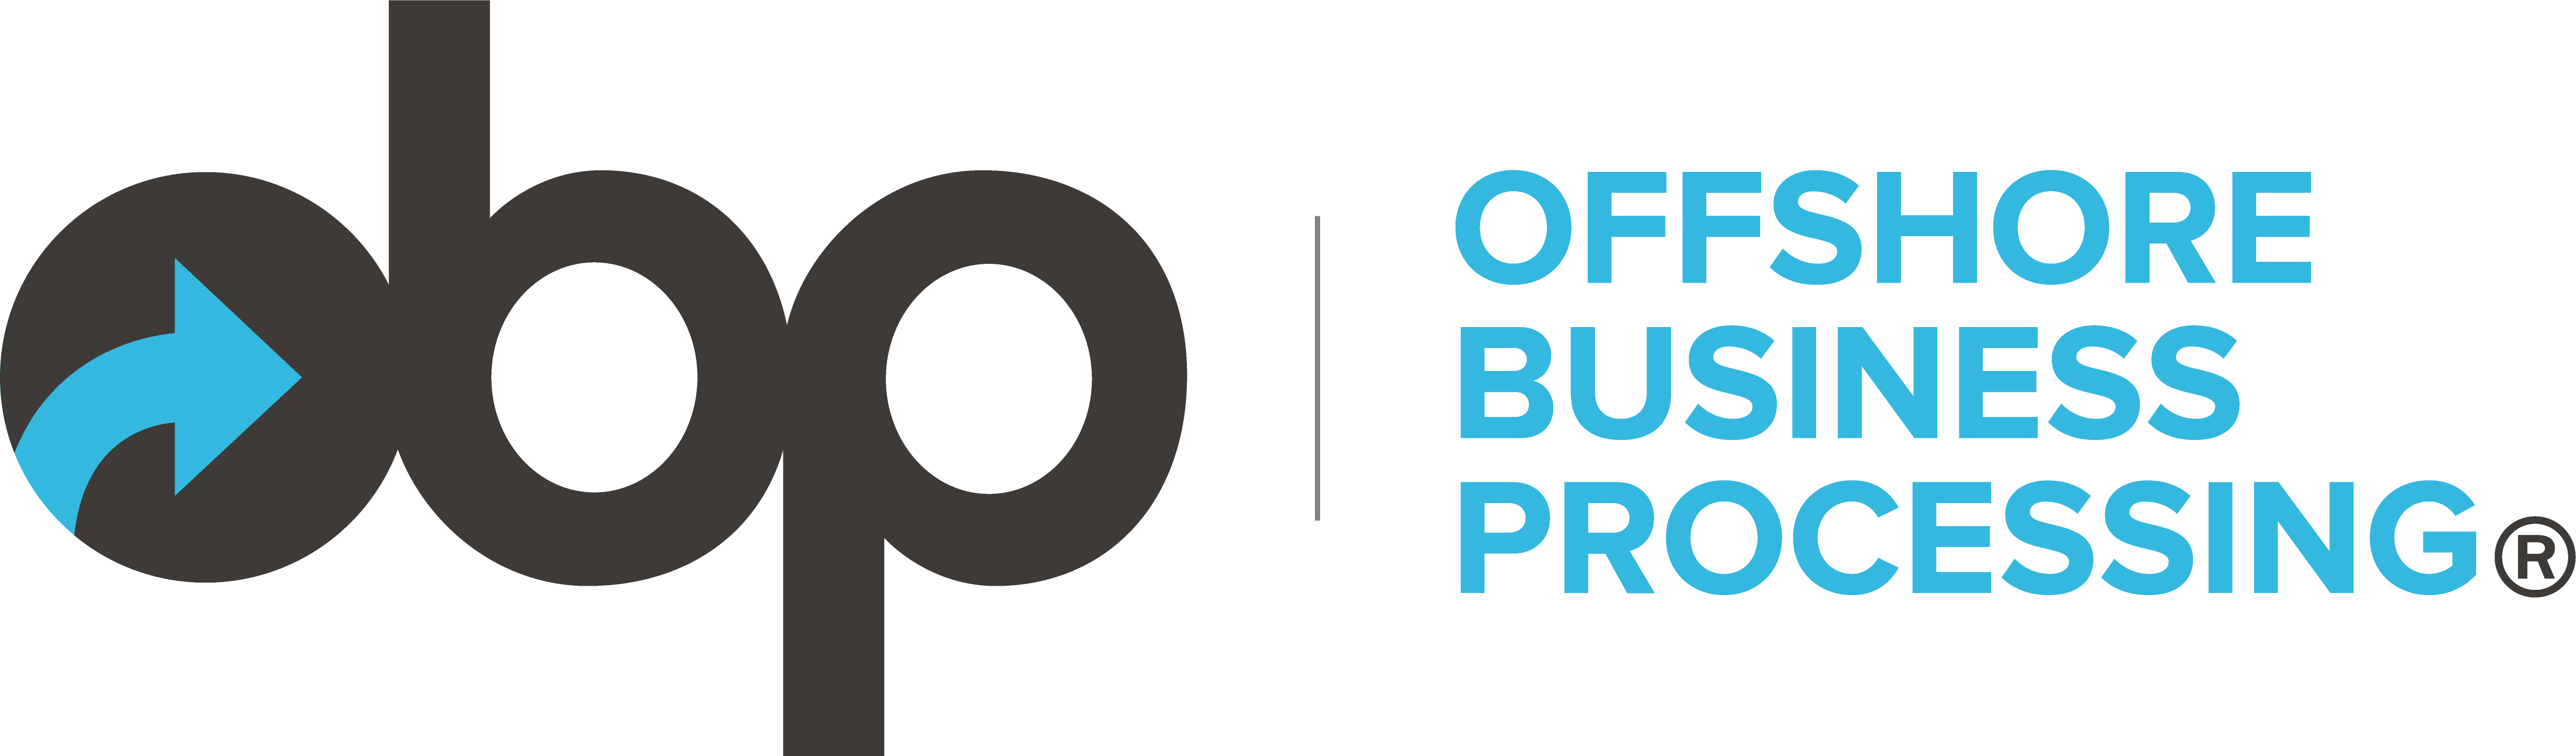 Offshore Business Processing Logo